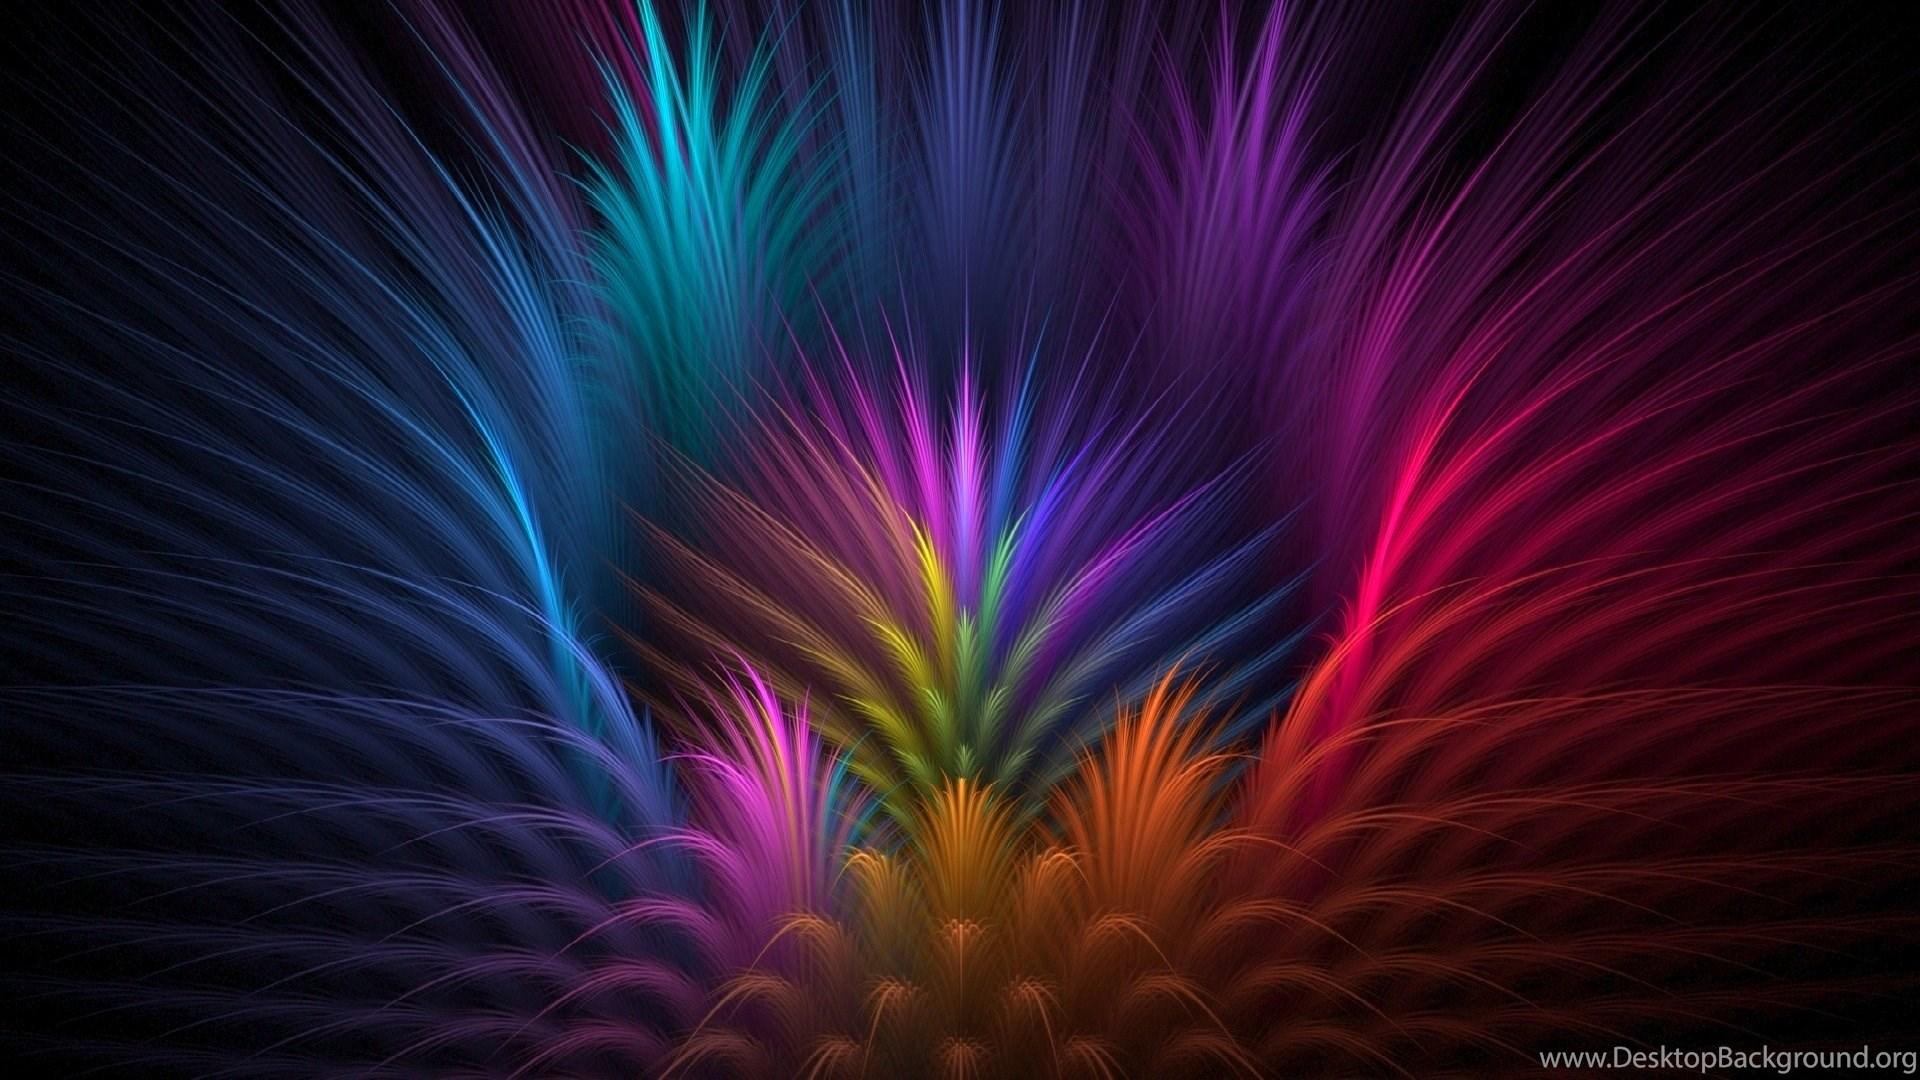 Abstract, Colored, Rays, Symmetry, Feather, Art, Background